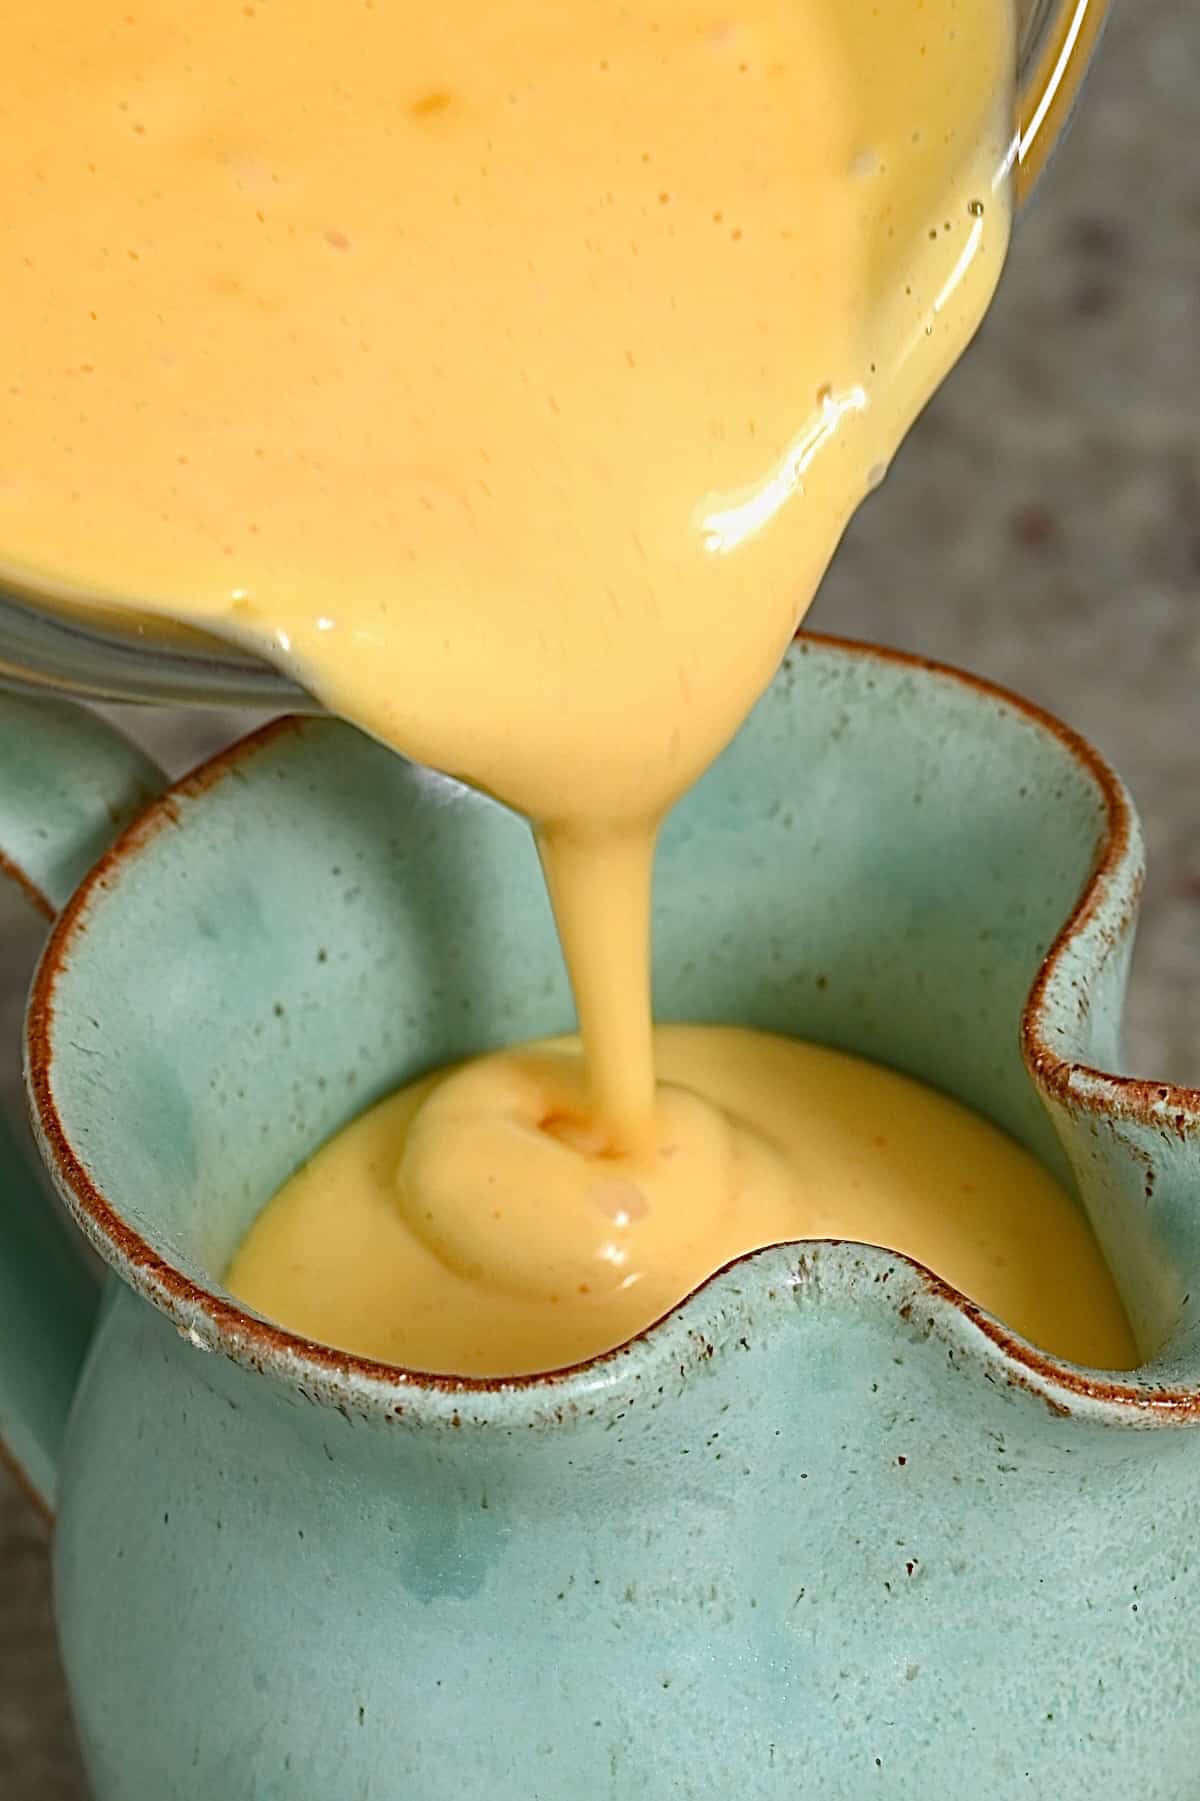 Hollandaise Sauce Recipe (Easy and Fast, In a Blender)